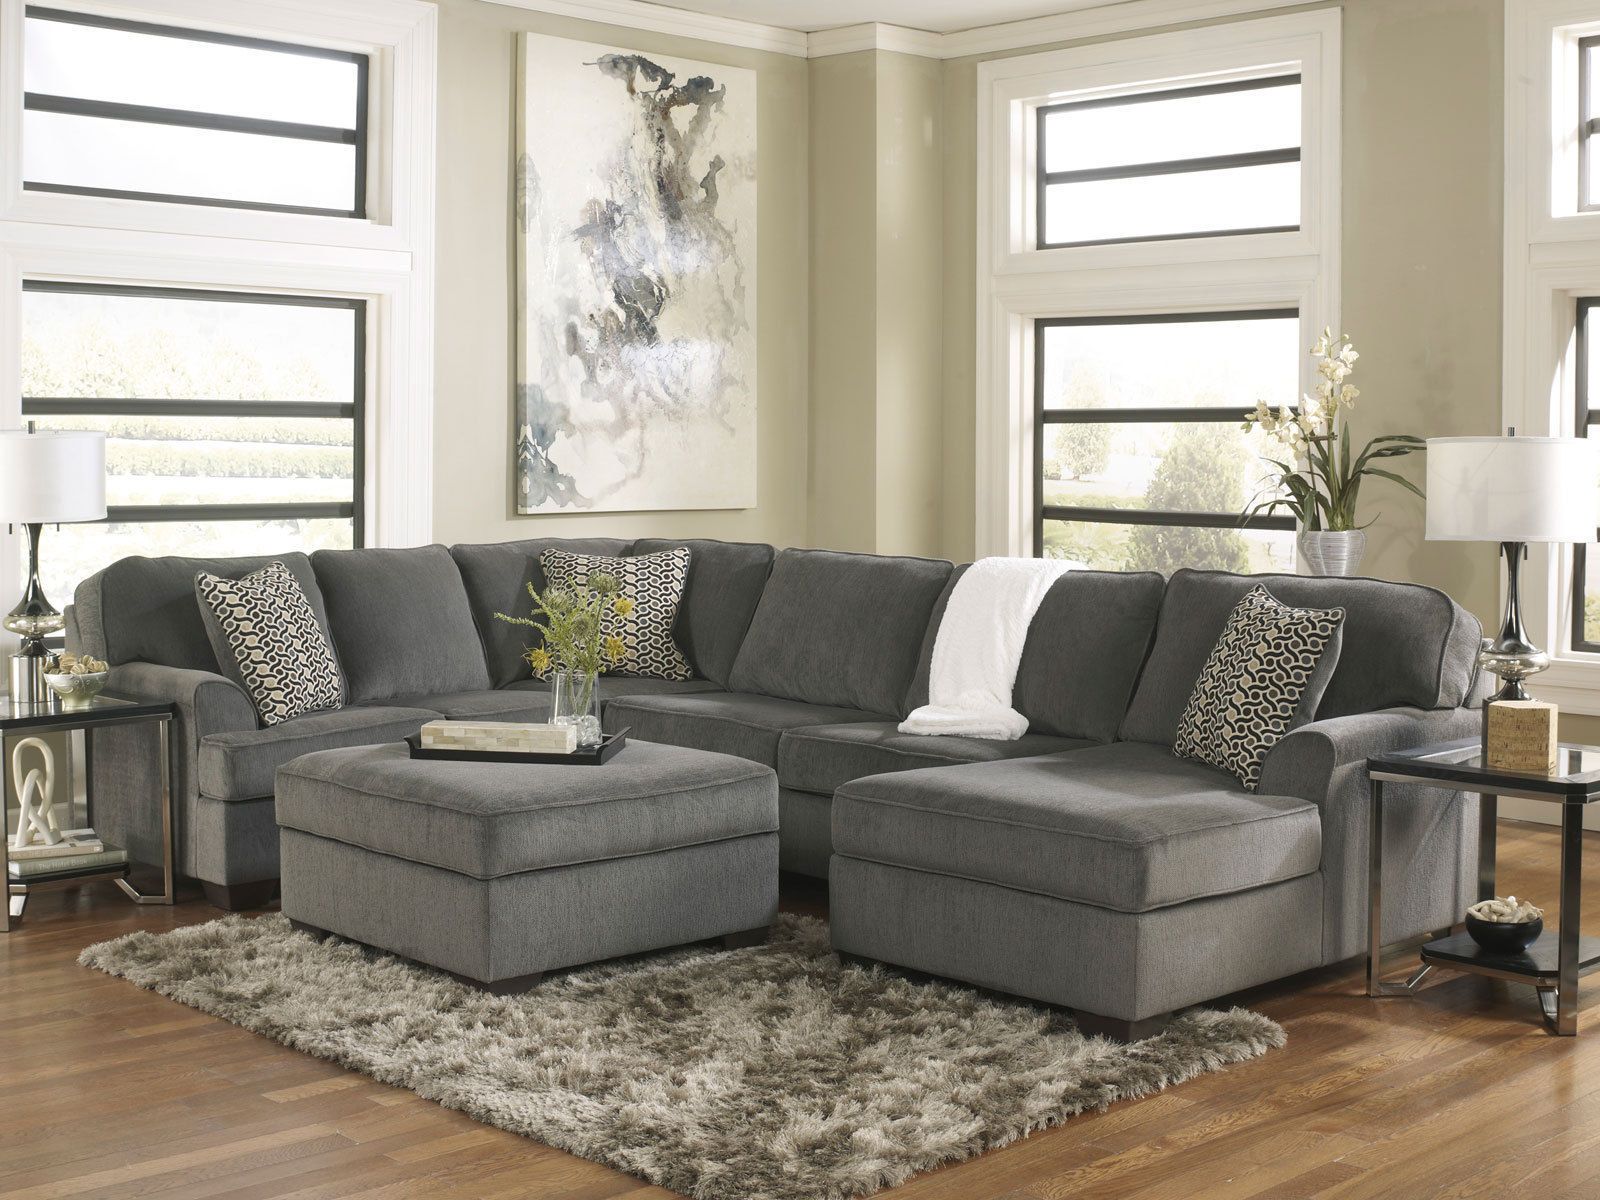 Sole Oversized Modern Gray Fabric Sofa Couch Sectional Set Living Room Throughout Modern Light Grey Loveseat Sofas (View 13 of 20)